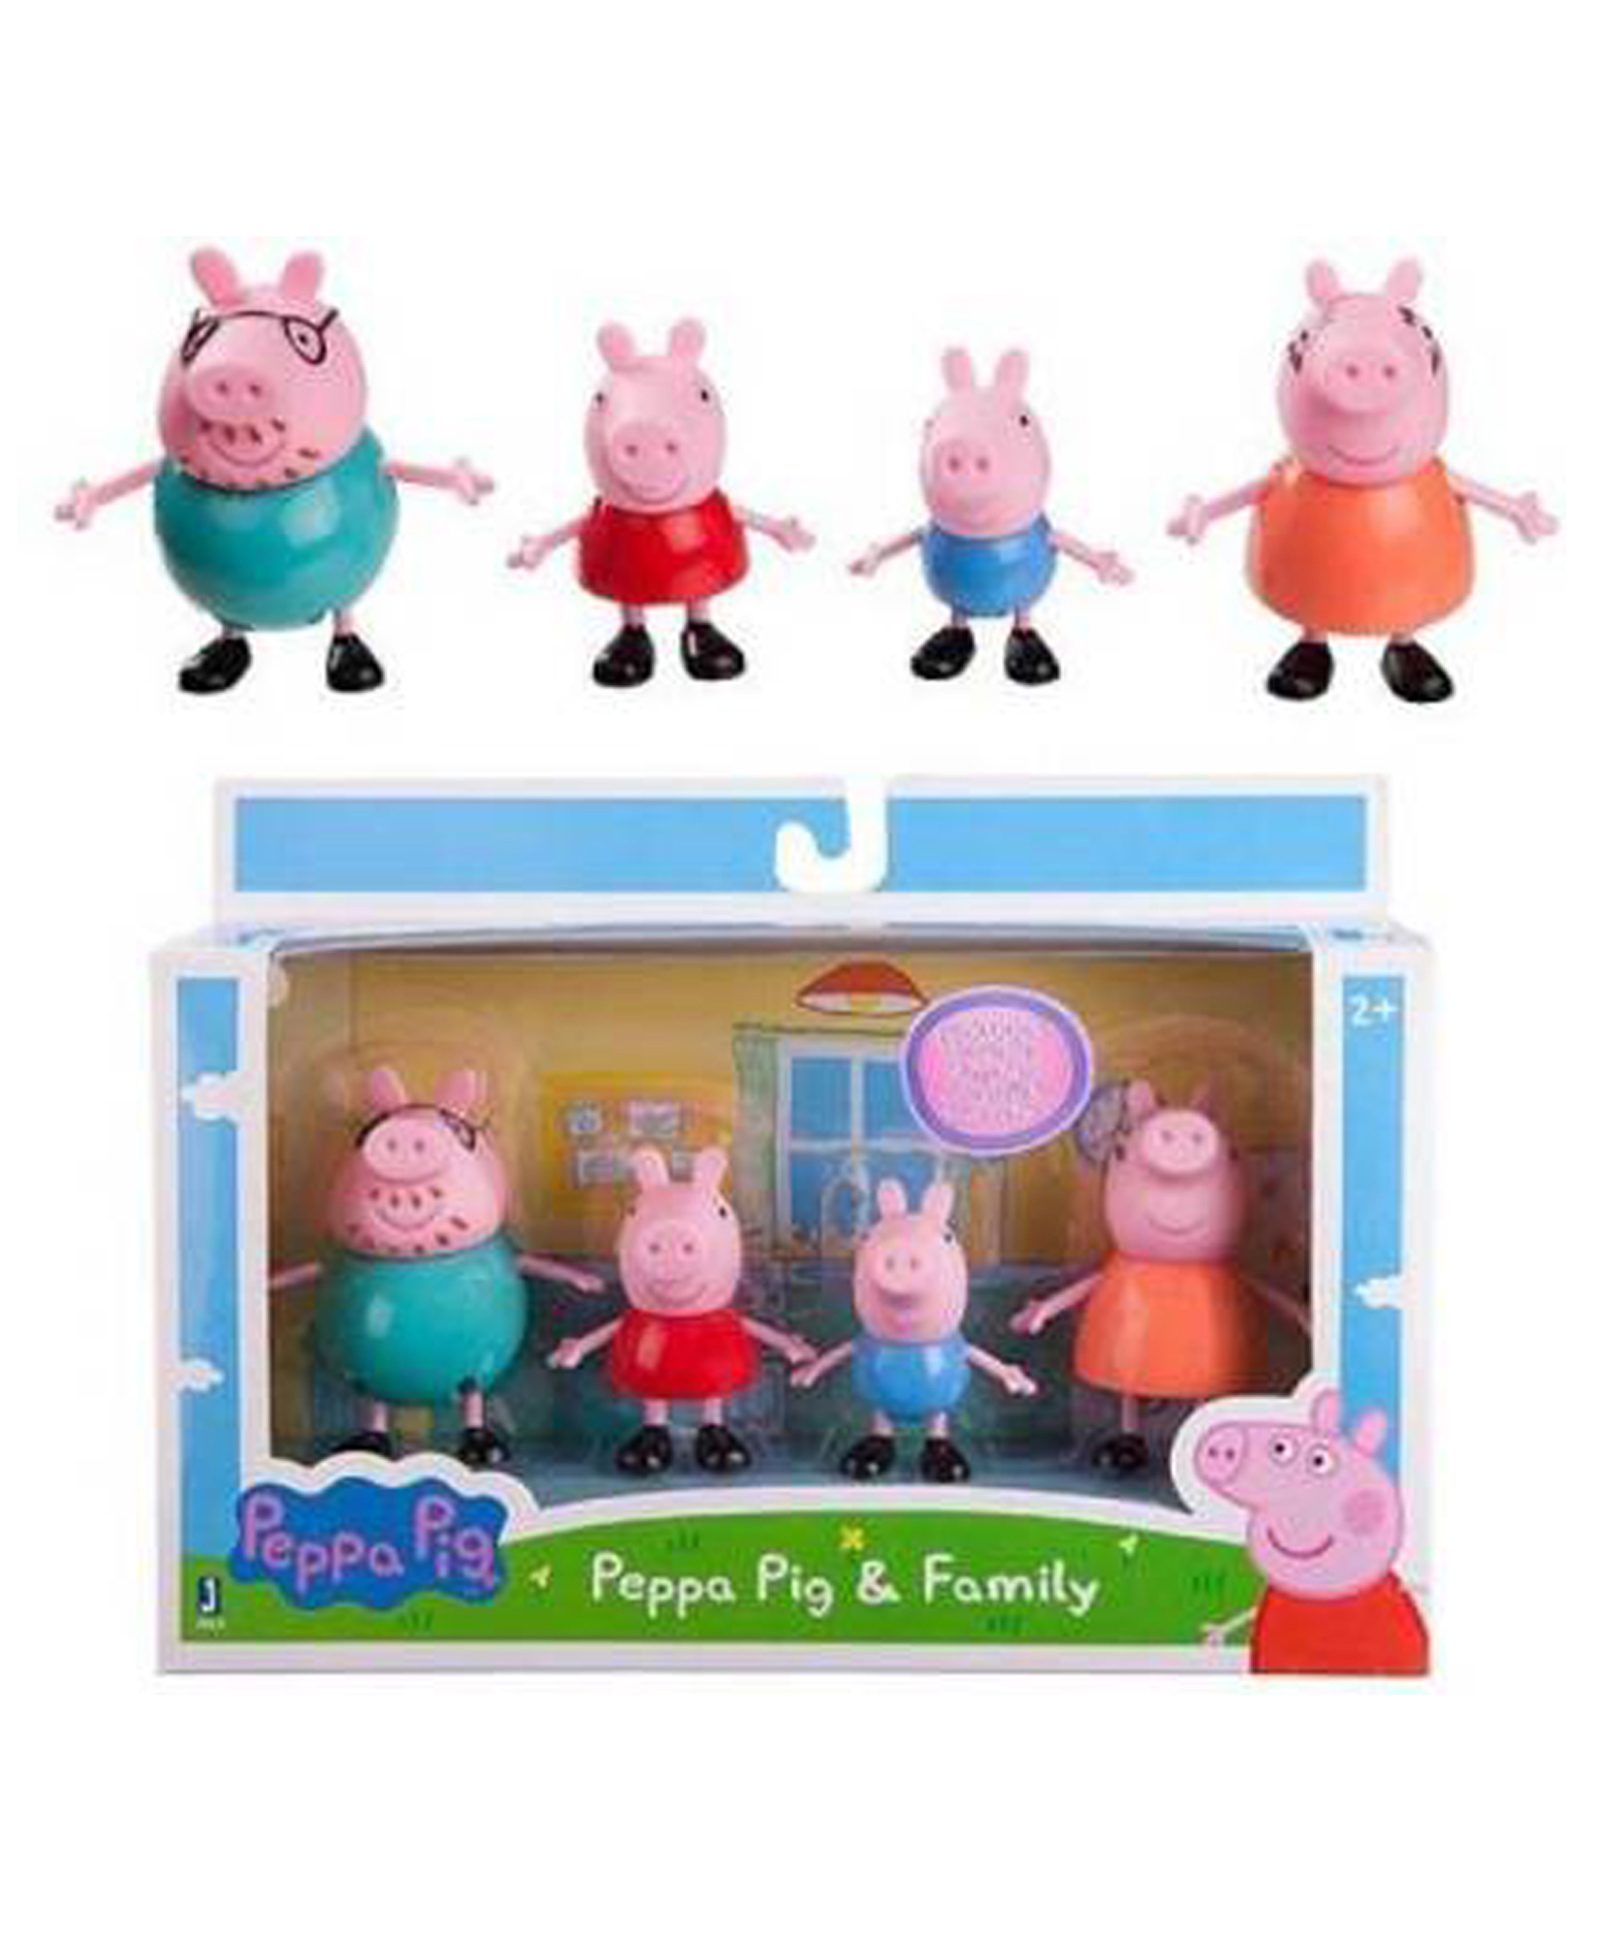 Yunicorn Max Peppa Pig Toys Family Set - Multicolour Online India, Buy  Figures & Playsets for (3-10 Years) at  - 9213009